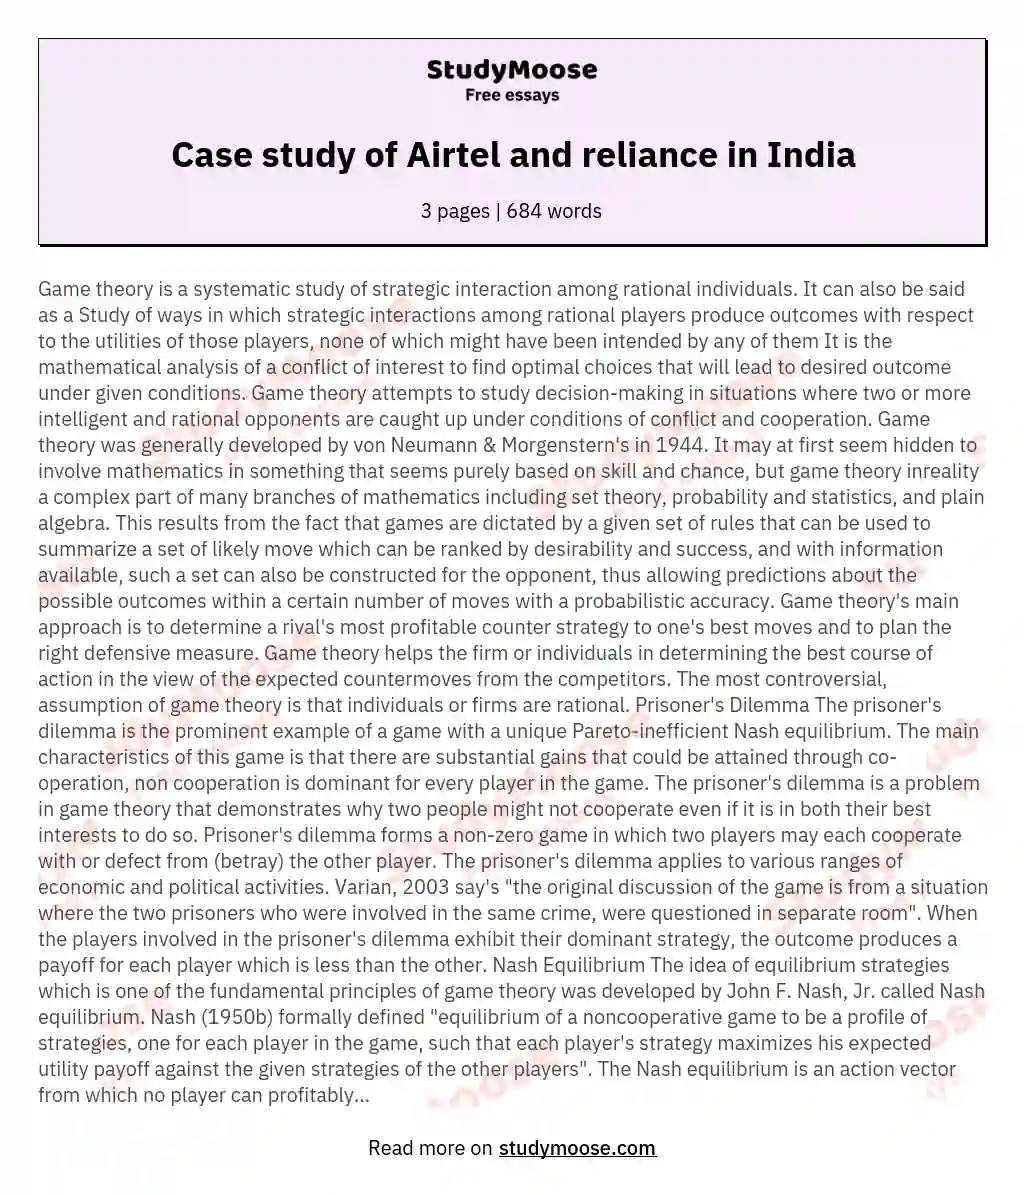 Case study of Airtel and reliance in India essay